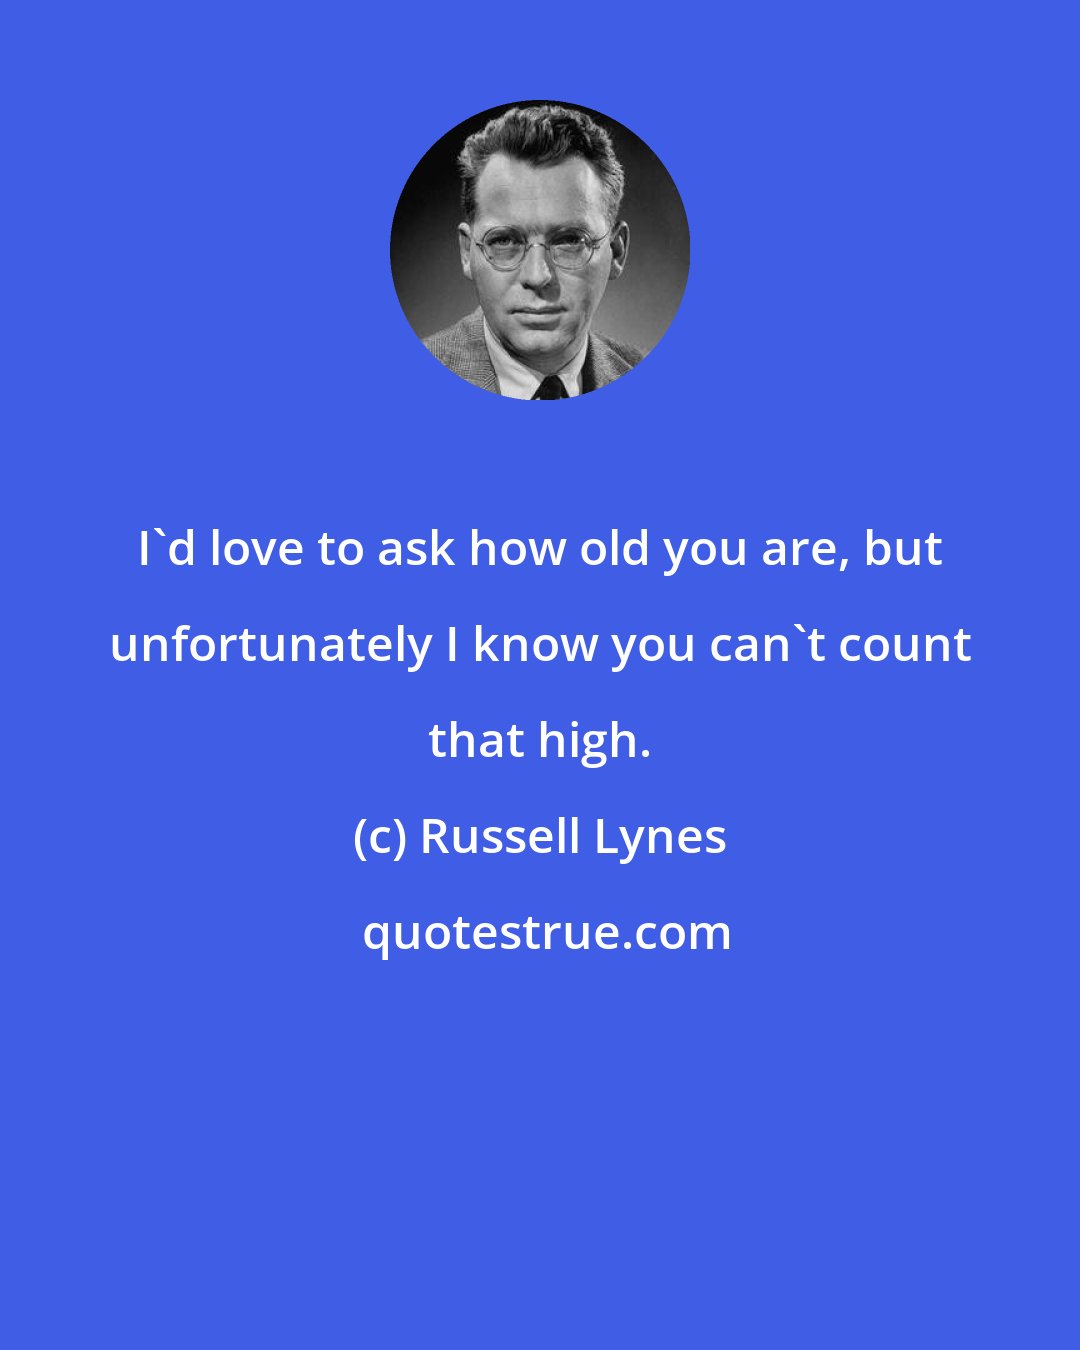 Russell Lynes: I'd love to ask how old you are, but unfortunately I know you can't count that high.